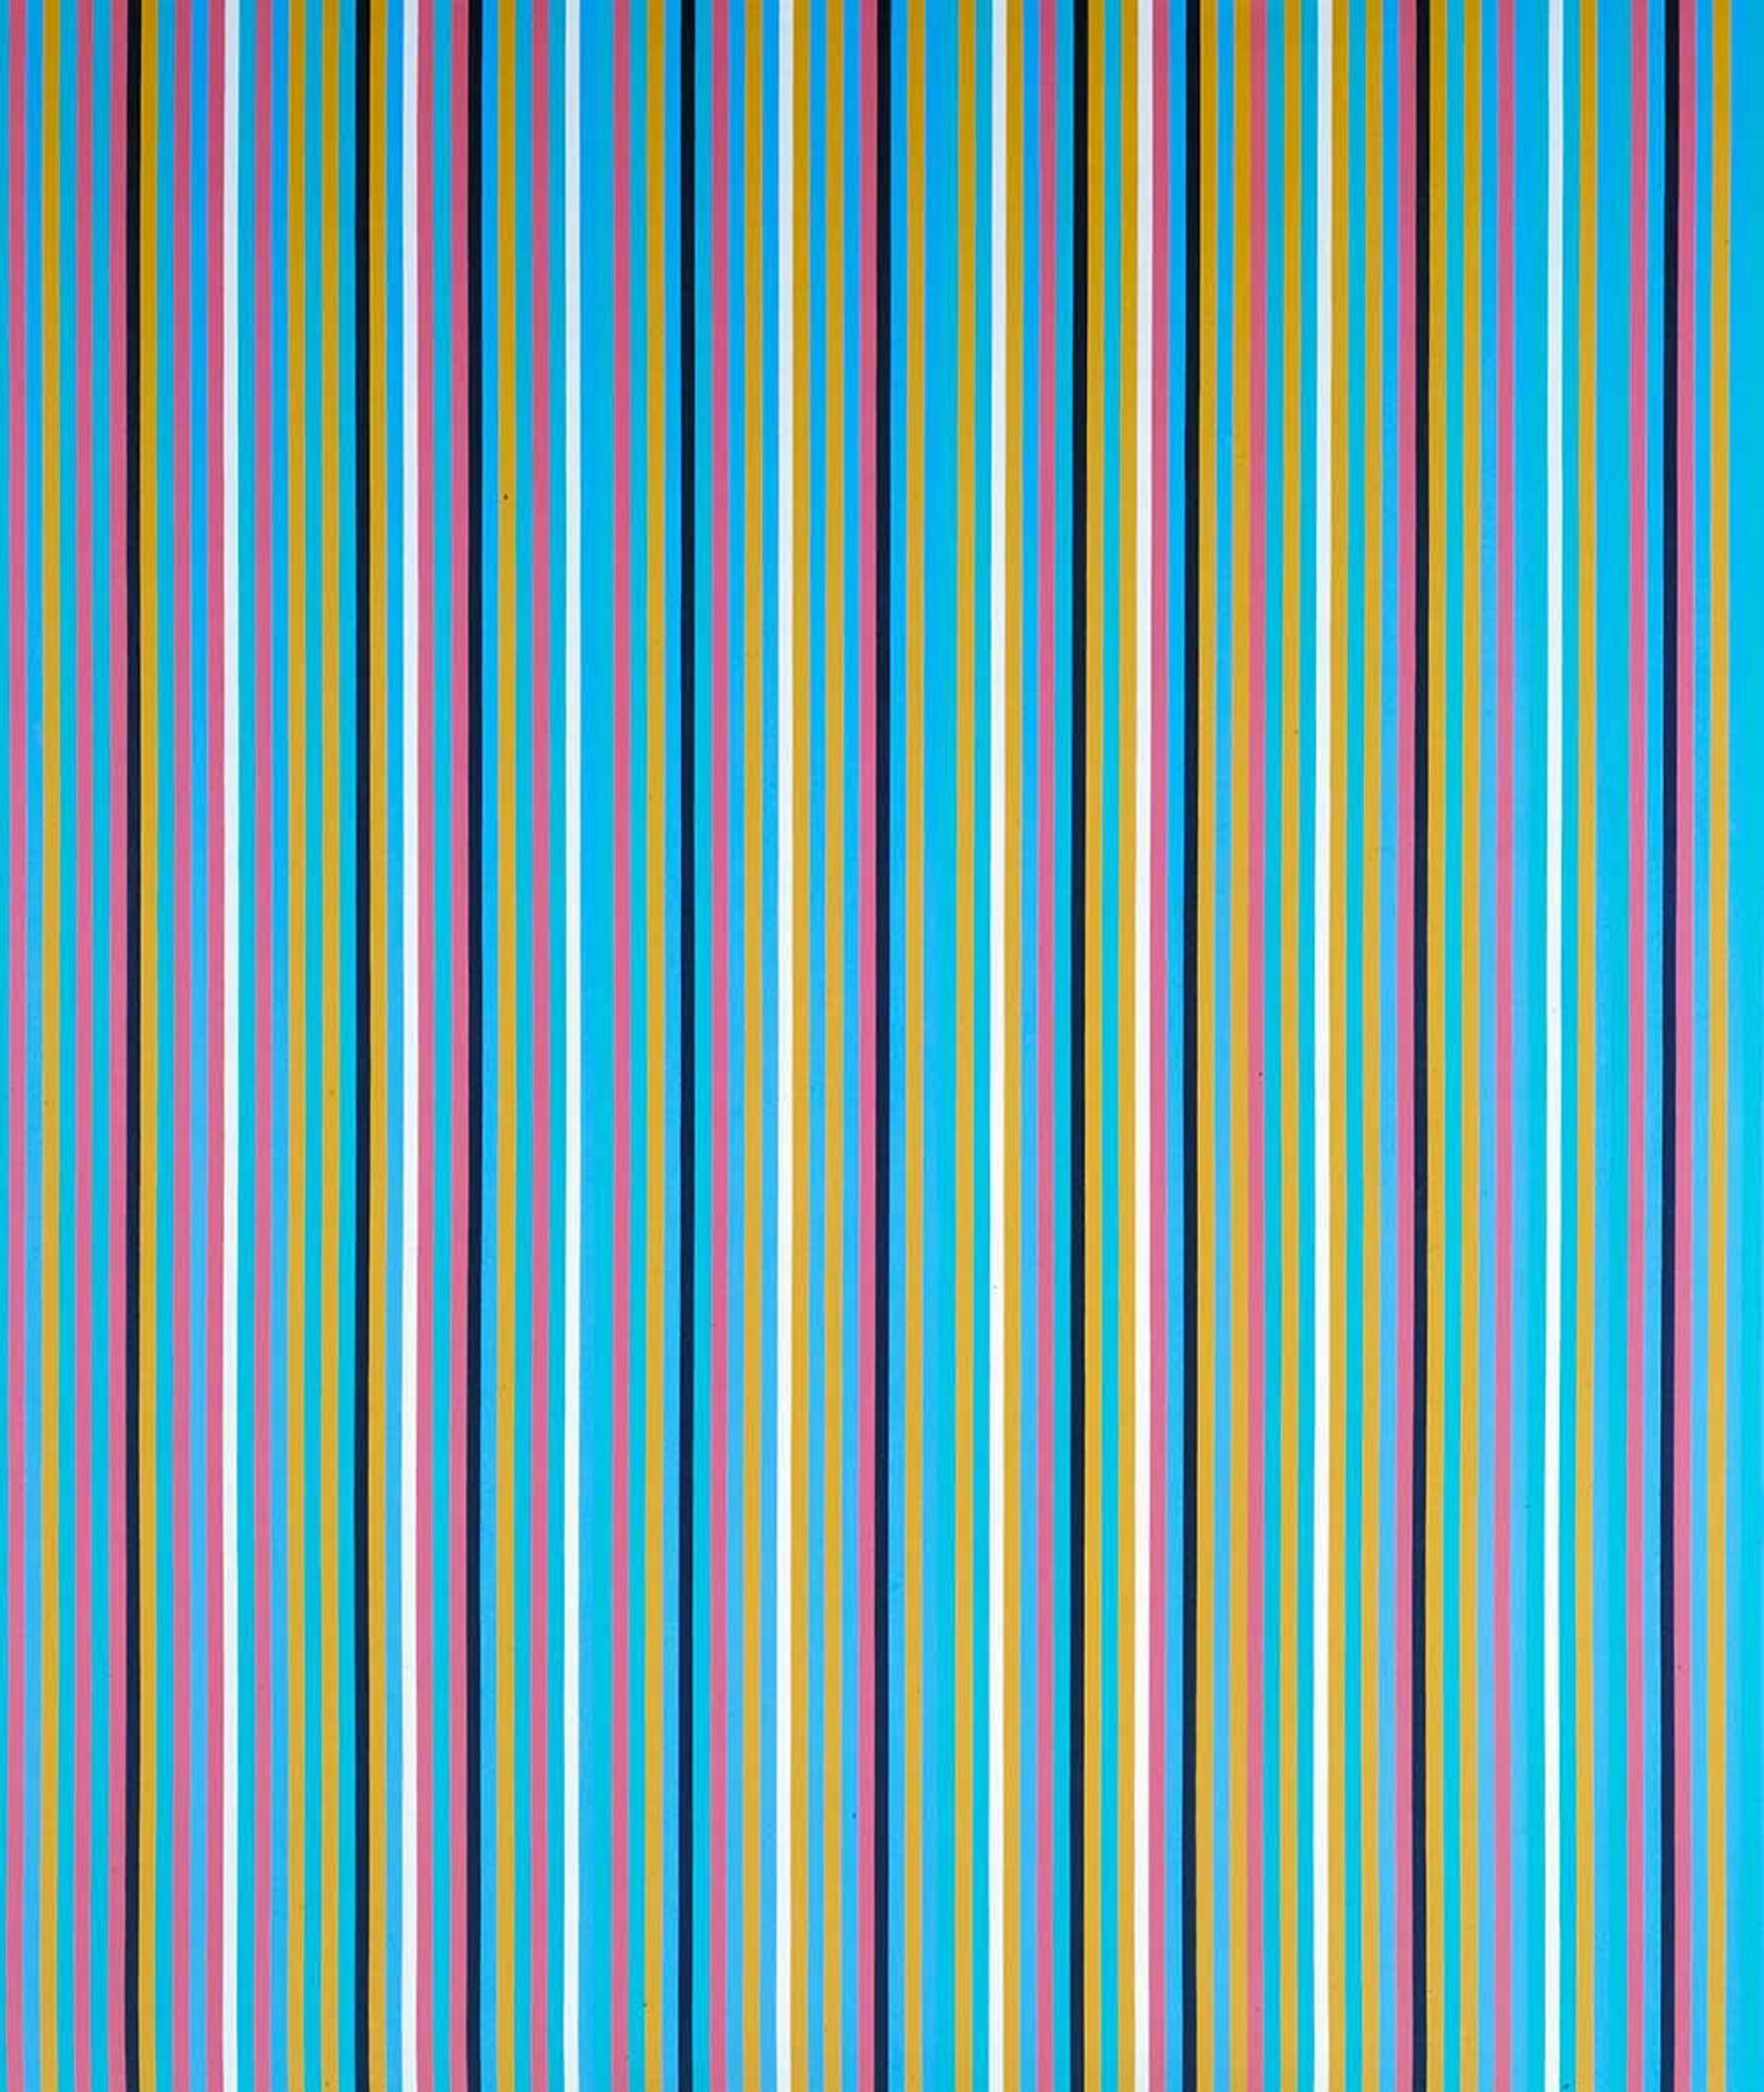 A Seller's Guide to Bridget Riley